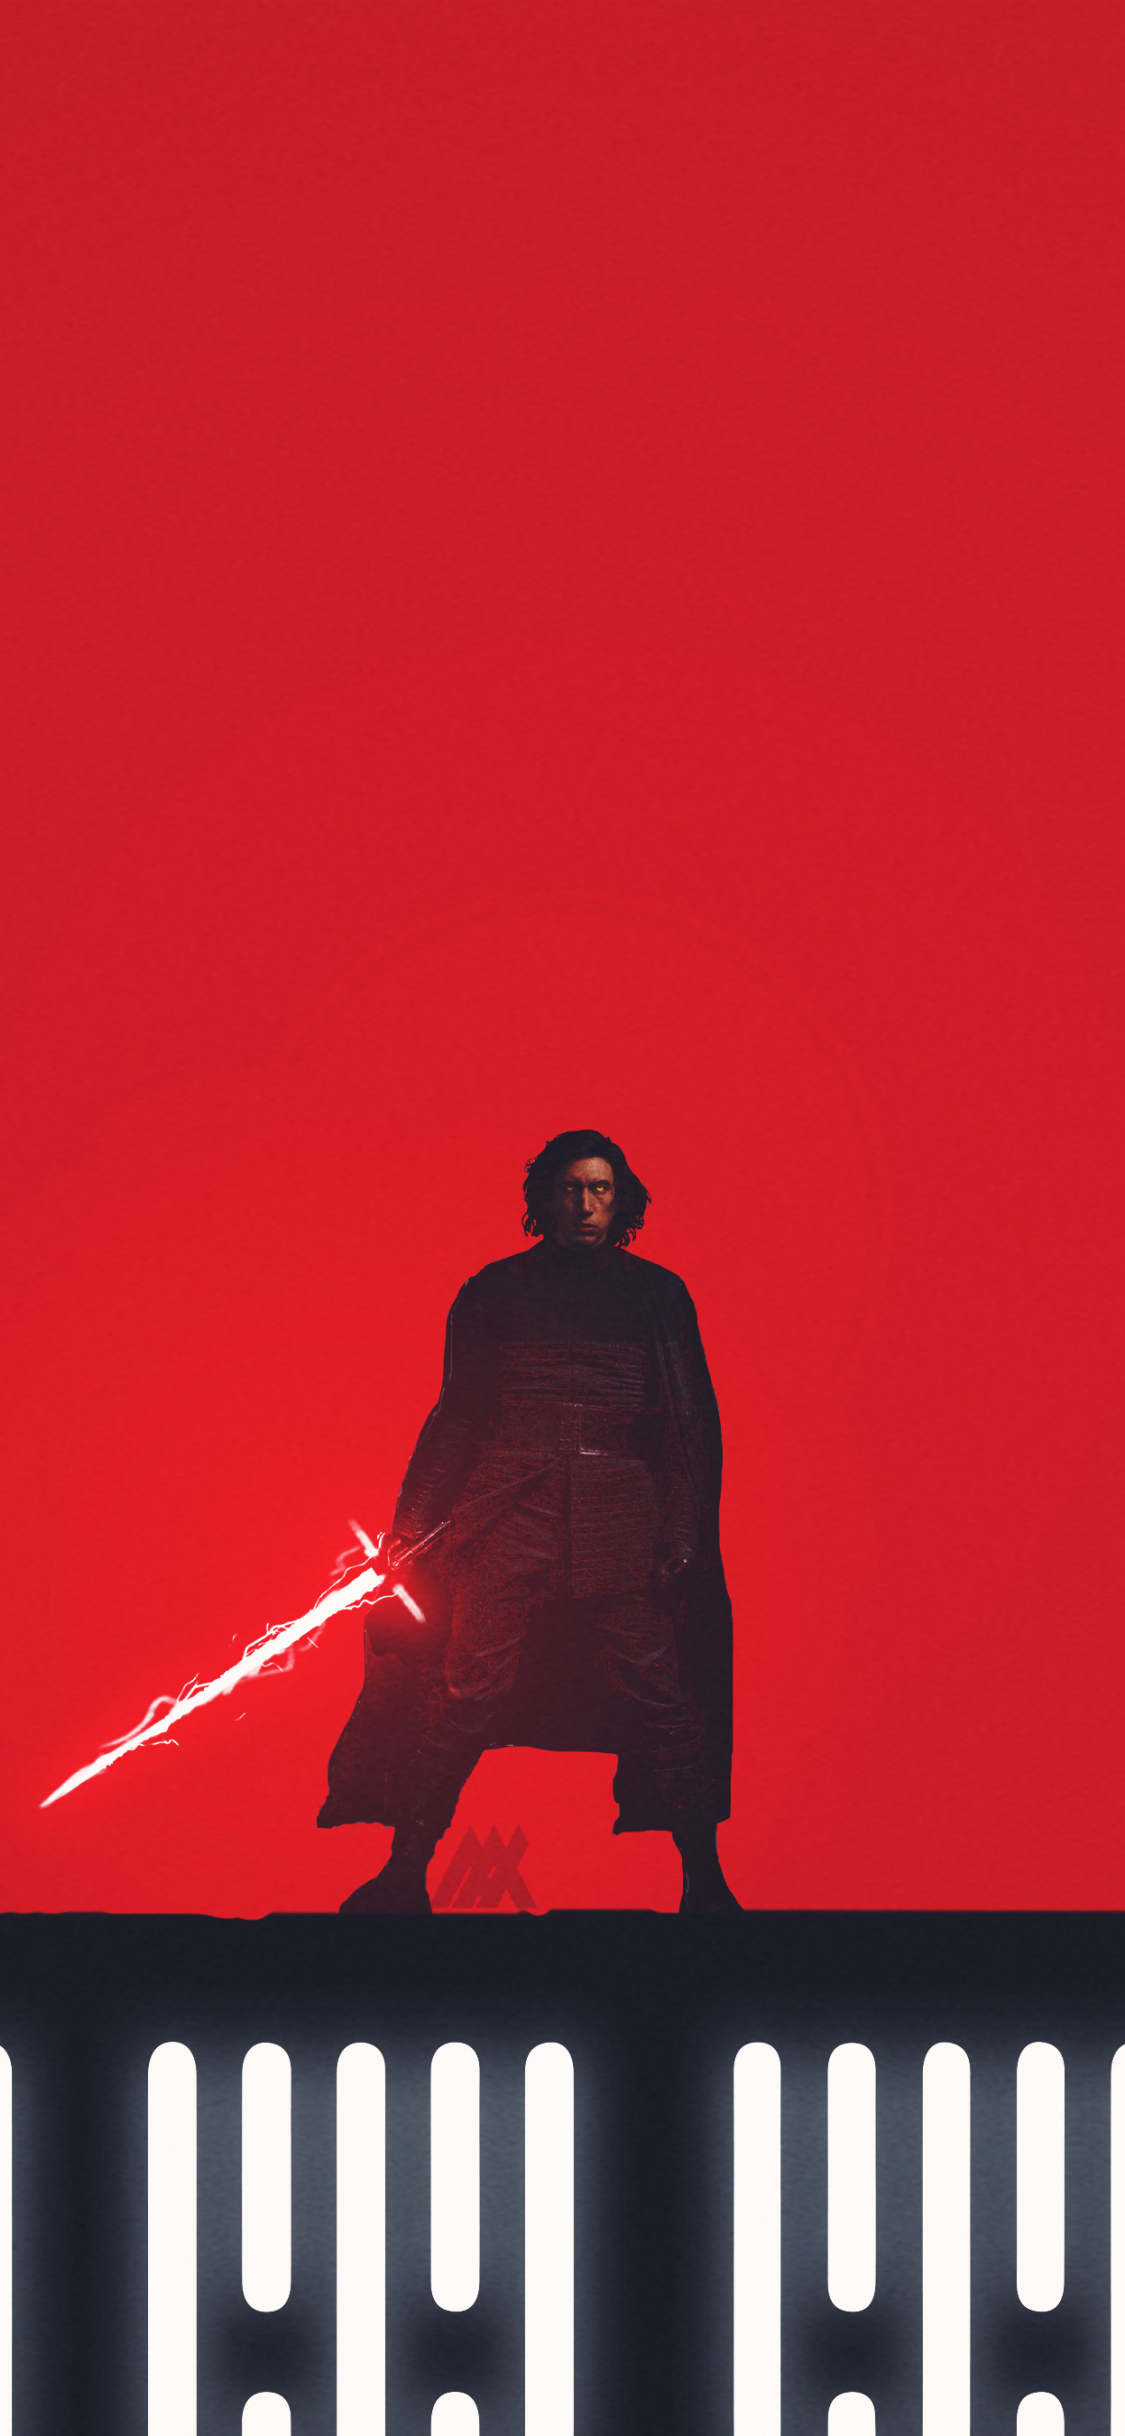 Kylo Ren standing on a roof with a red background - Star Wars